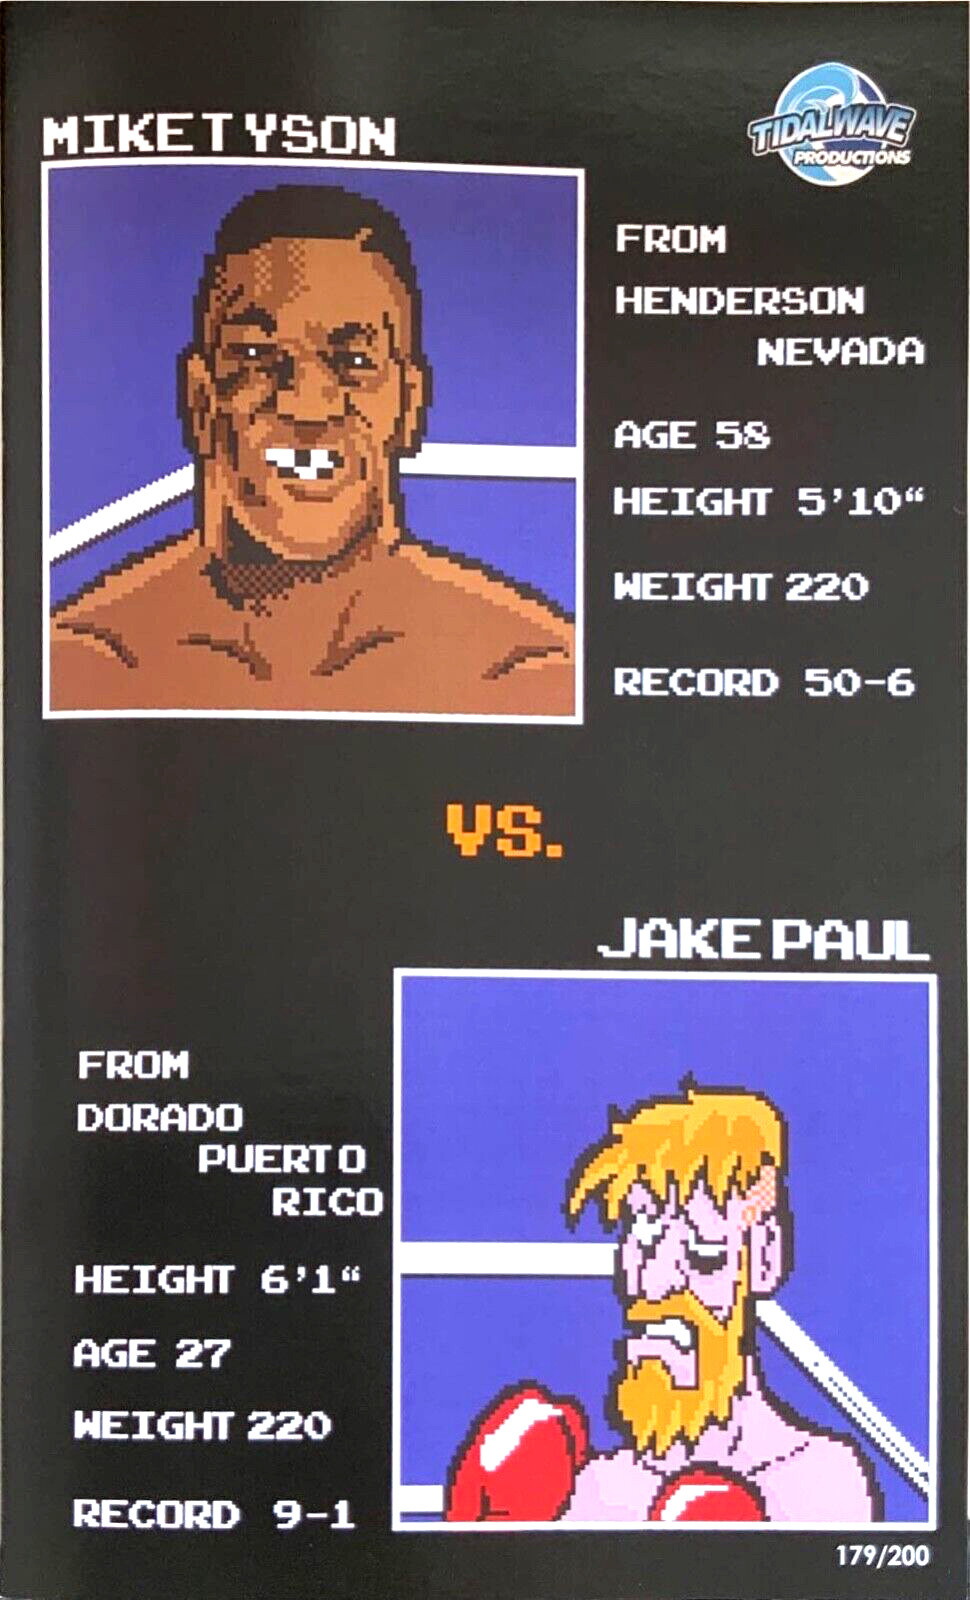 Fame: Mike Tyson #1 Punch Out Round 2  Numbered Variant Fan Expo Dallas NM.